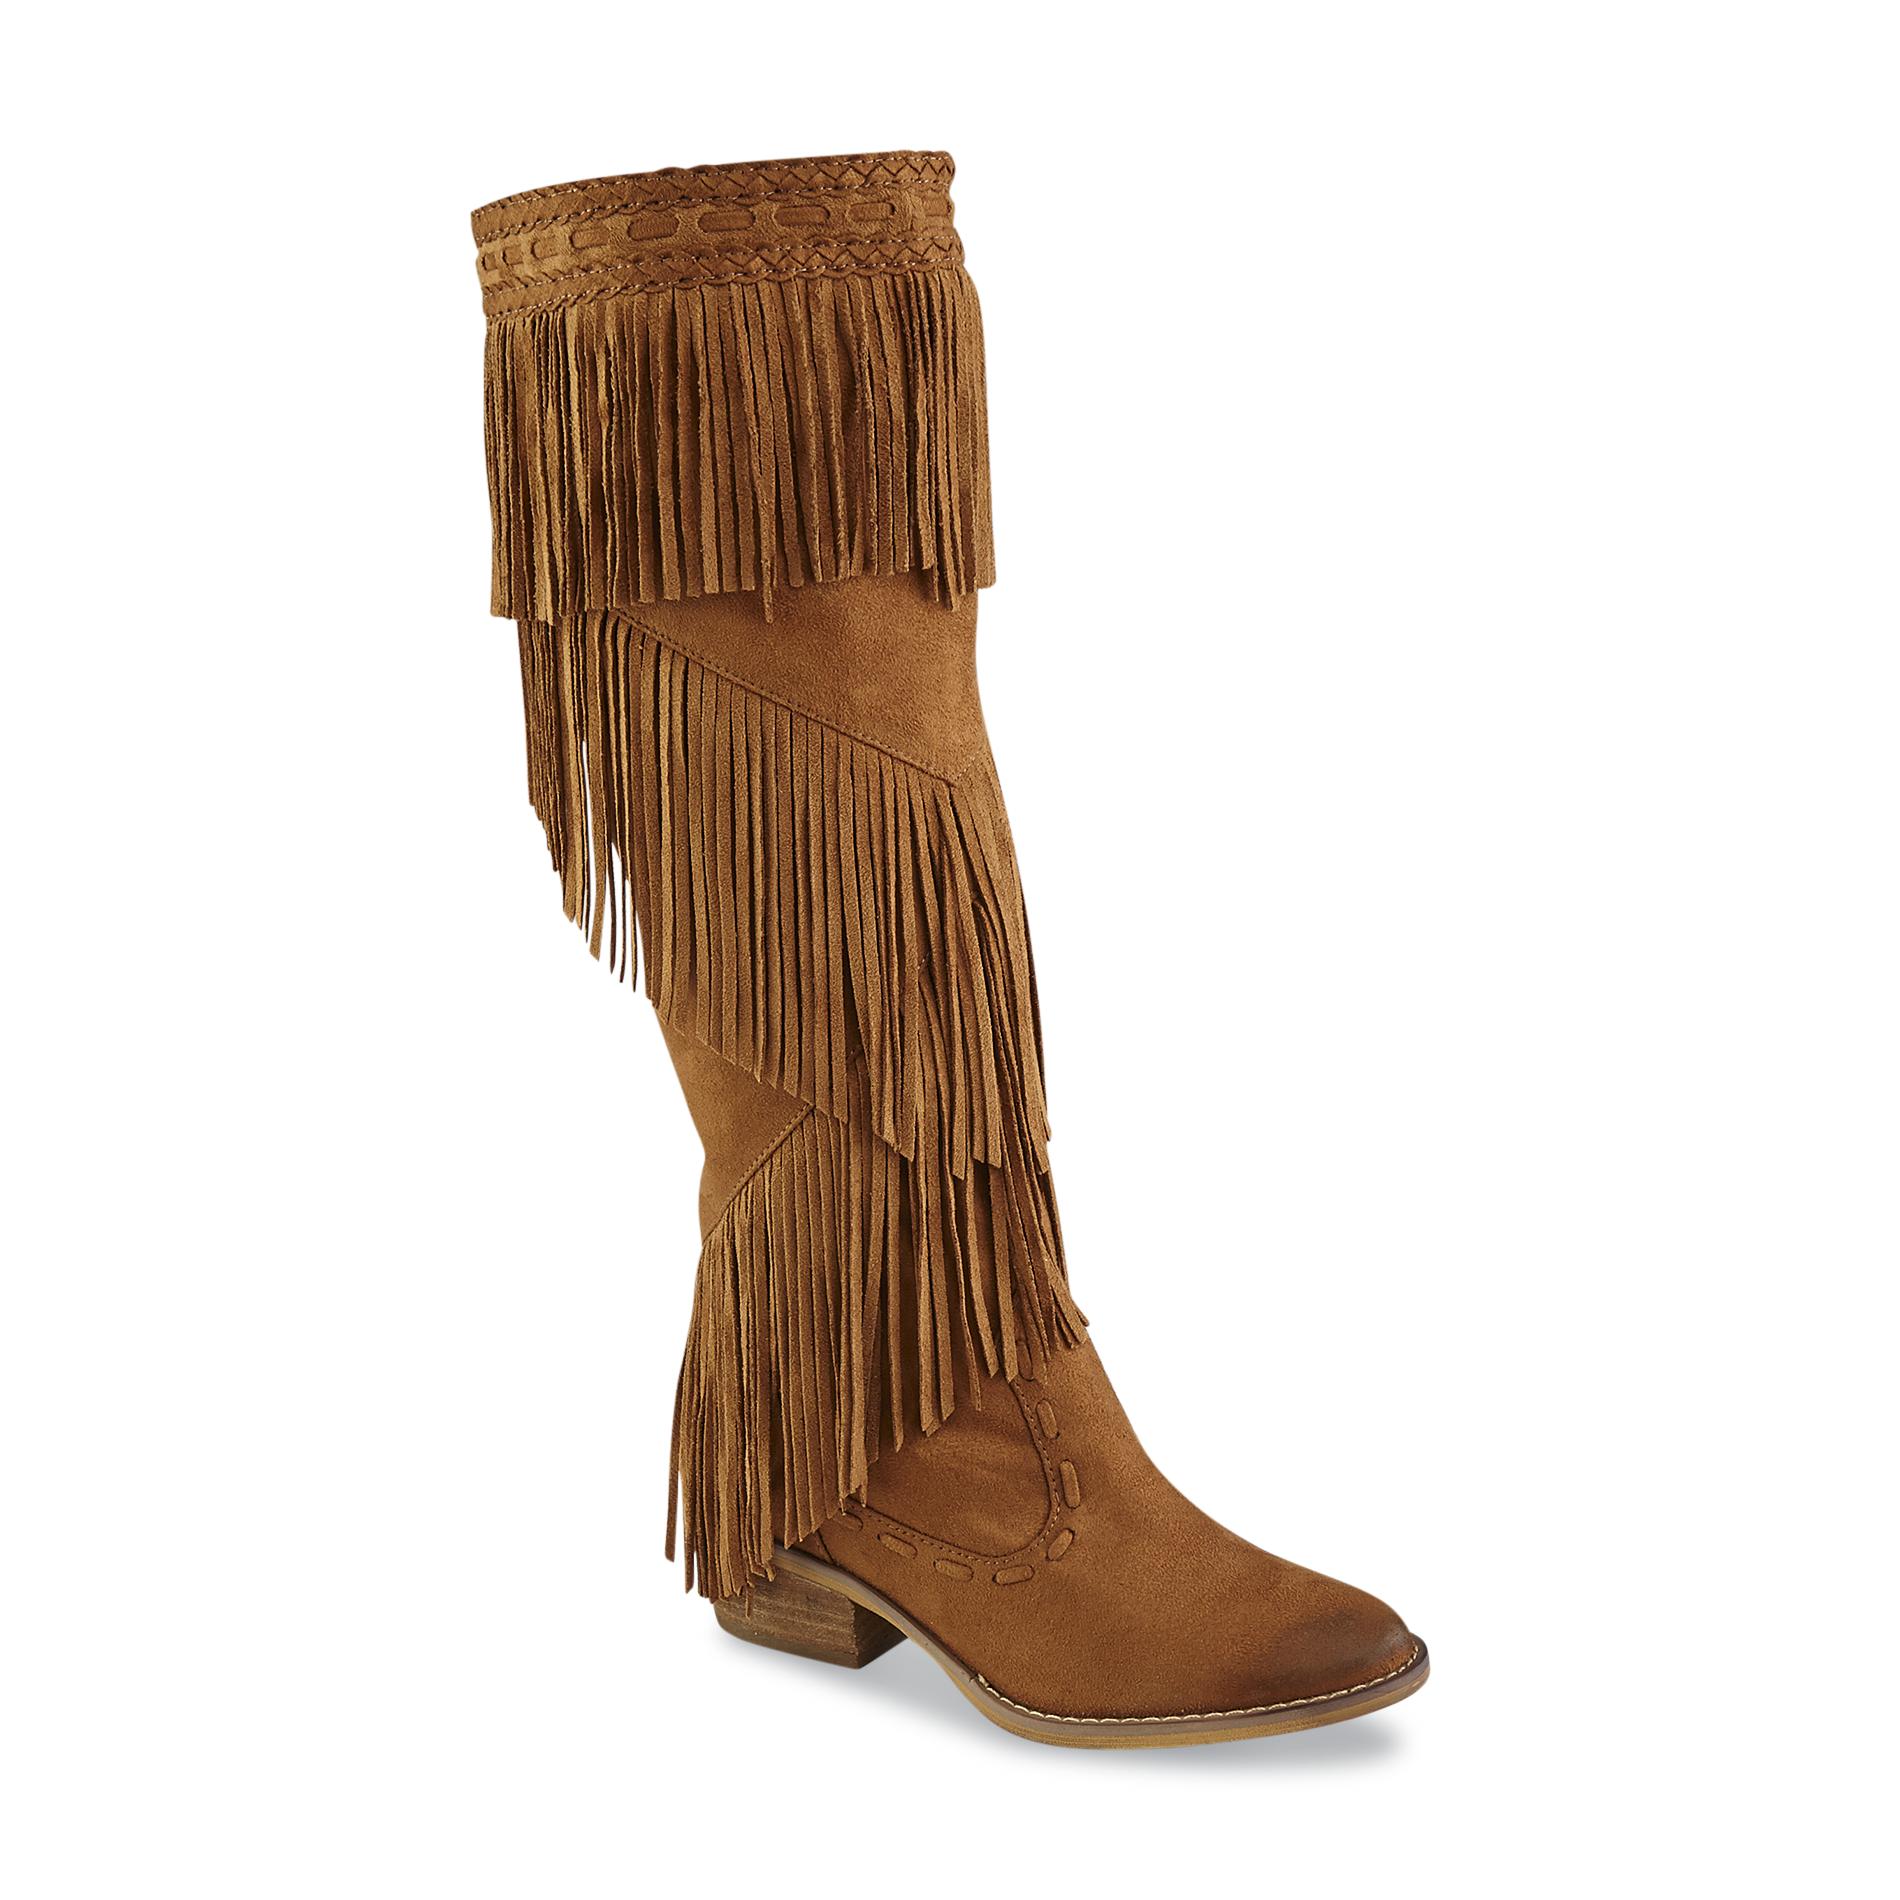 UPC 884886715148 product image for Not Rated Women's Witty Giddy Brown Fringe Western Boot - Not Rated | upcitemdb.com